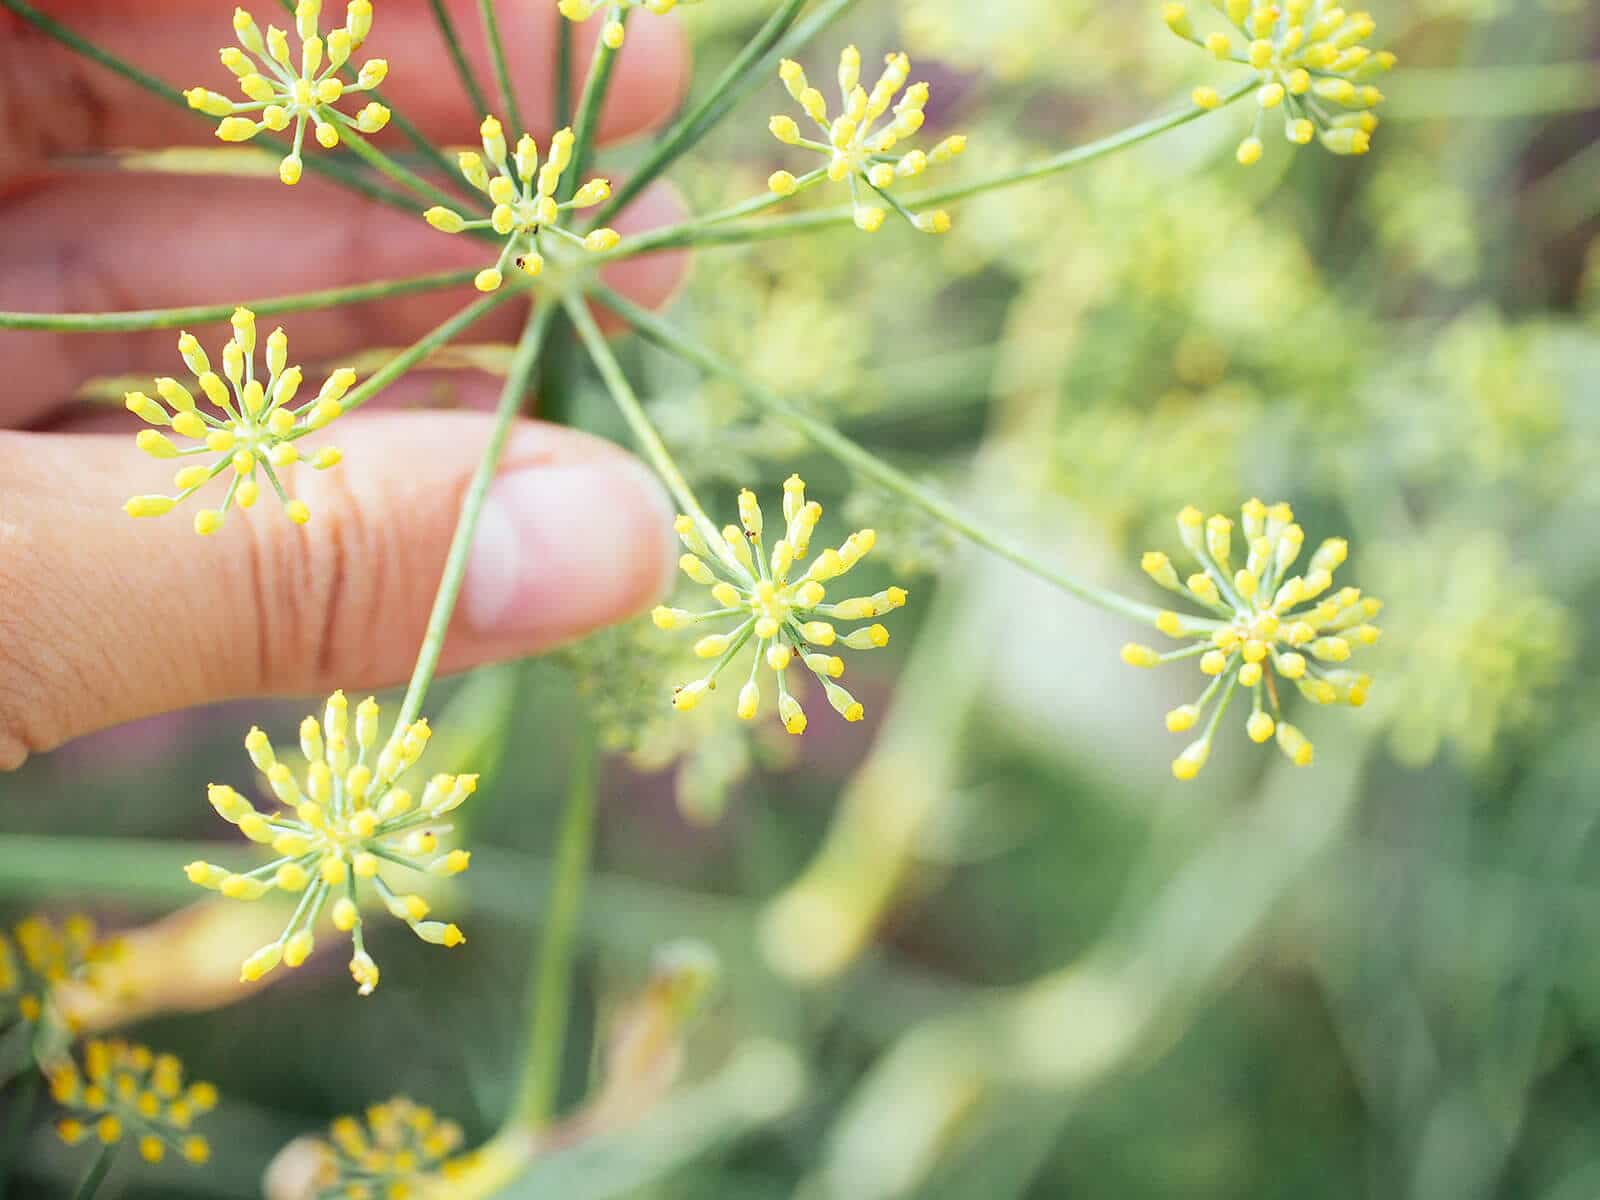 Hand holding a fennel flower stem